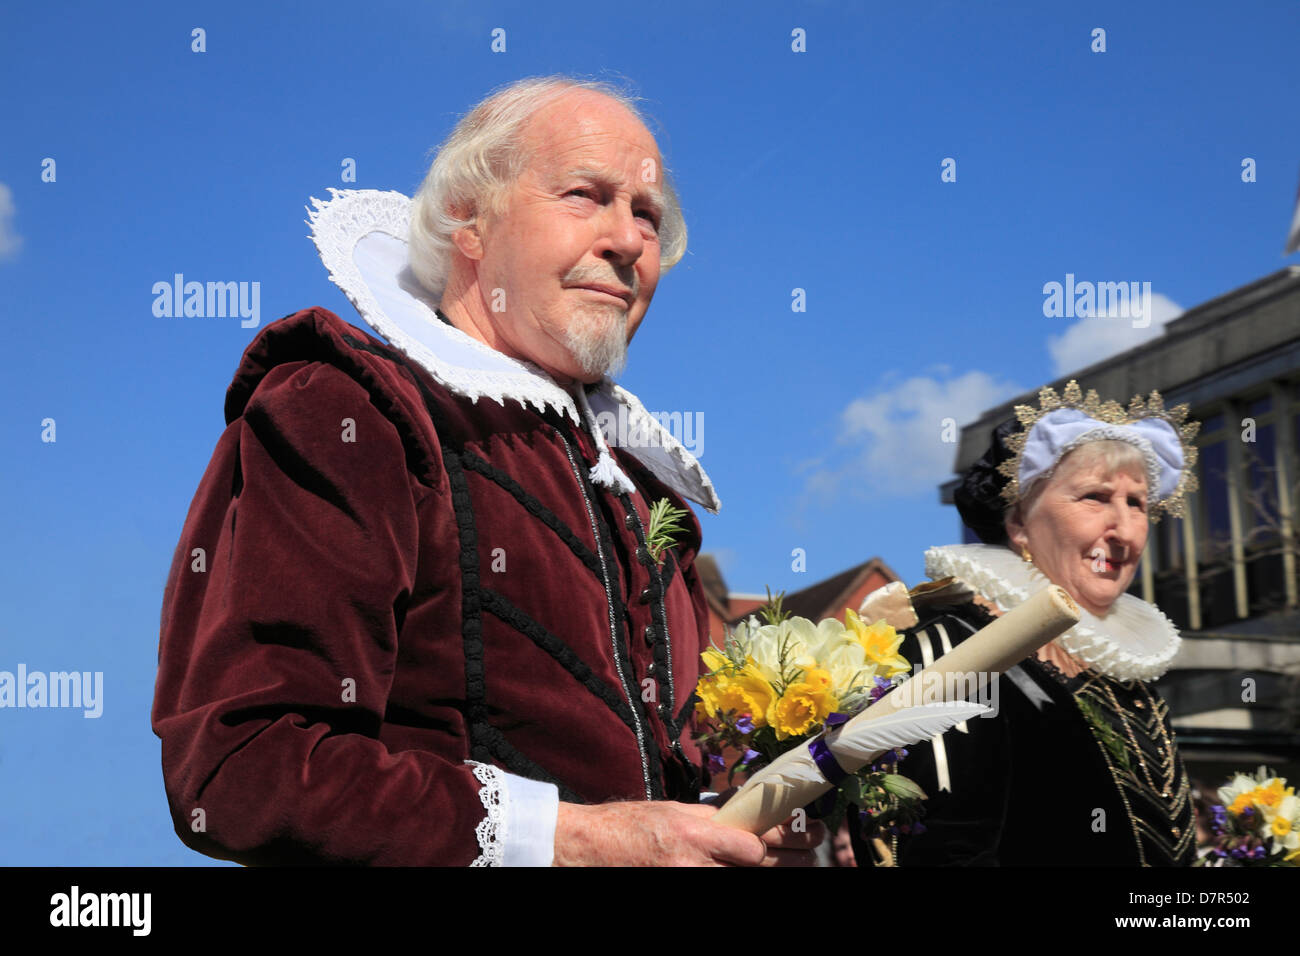 Shakespeare and Anne Hathaway at the annual Birthday Memorial Parade at Stratford upon Avon. (posed by actors) Stock Photo